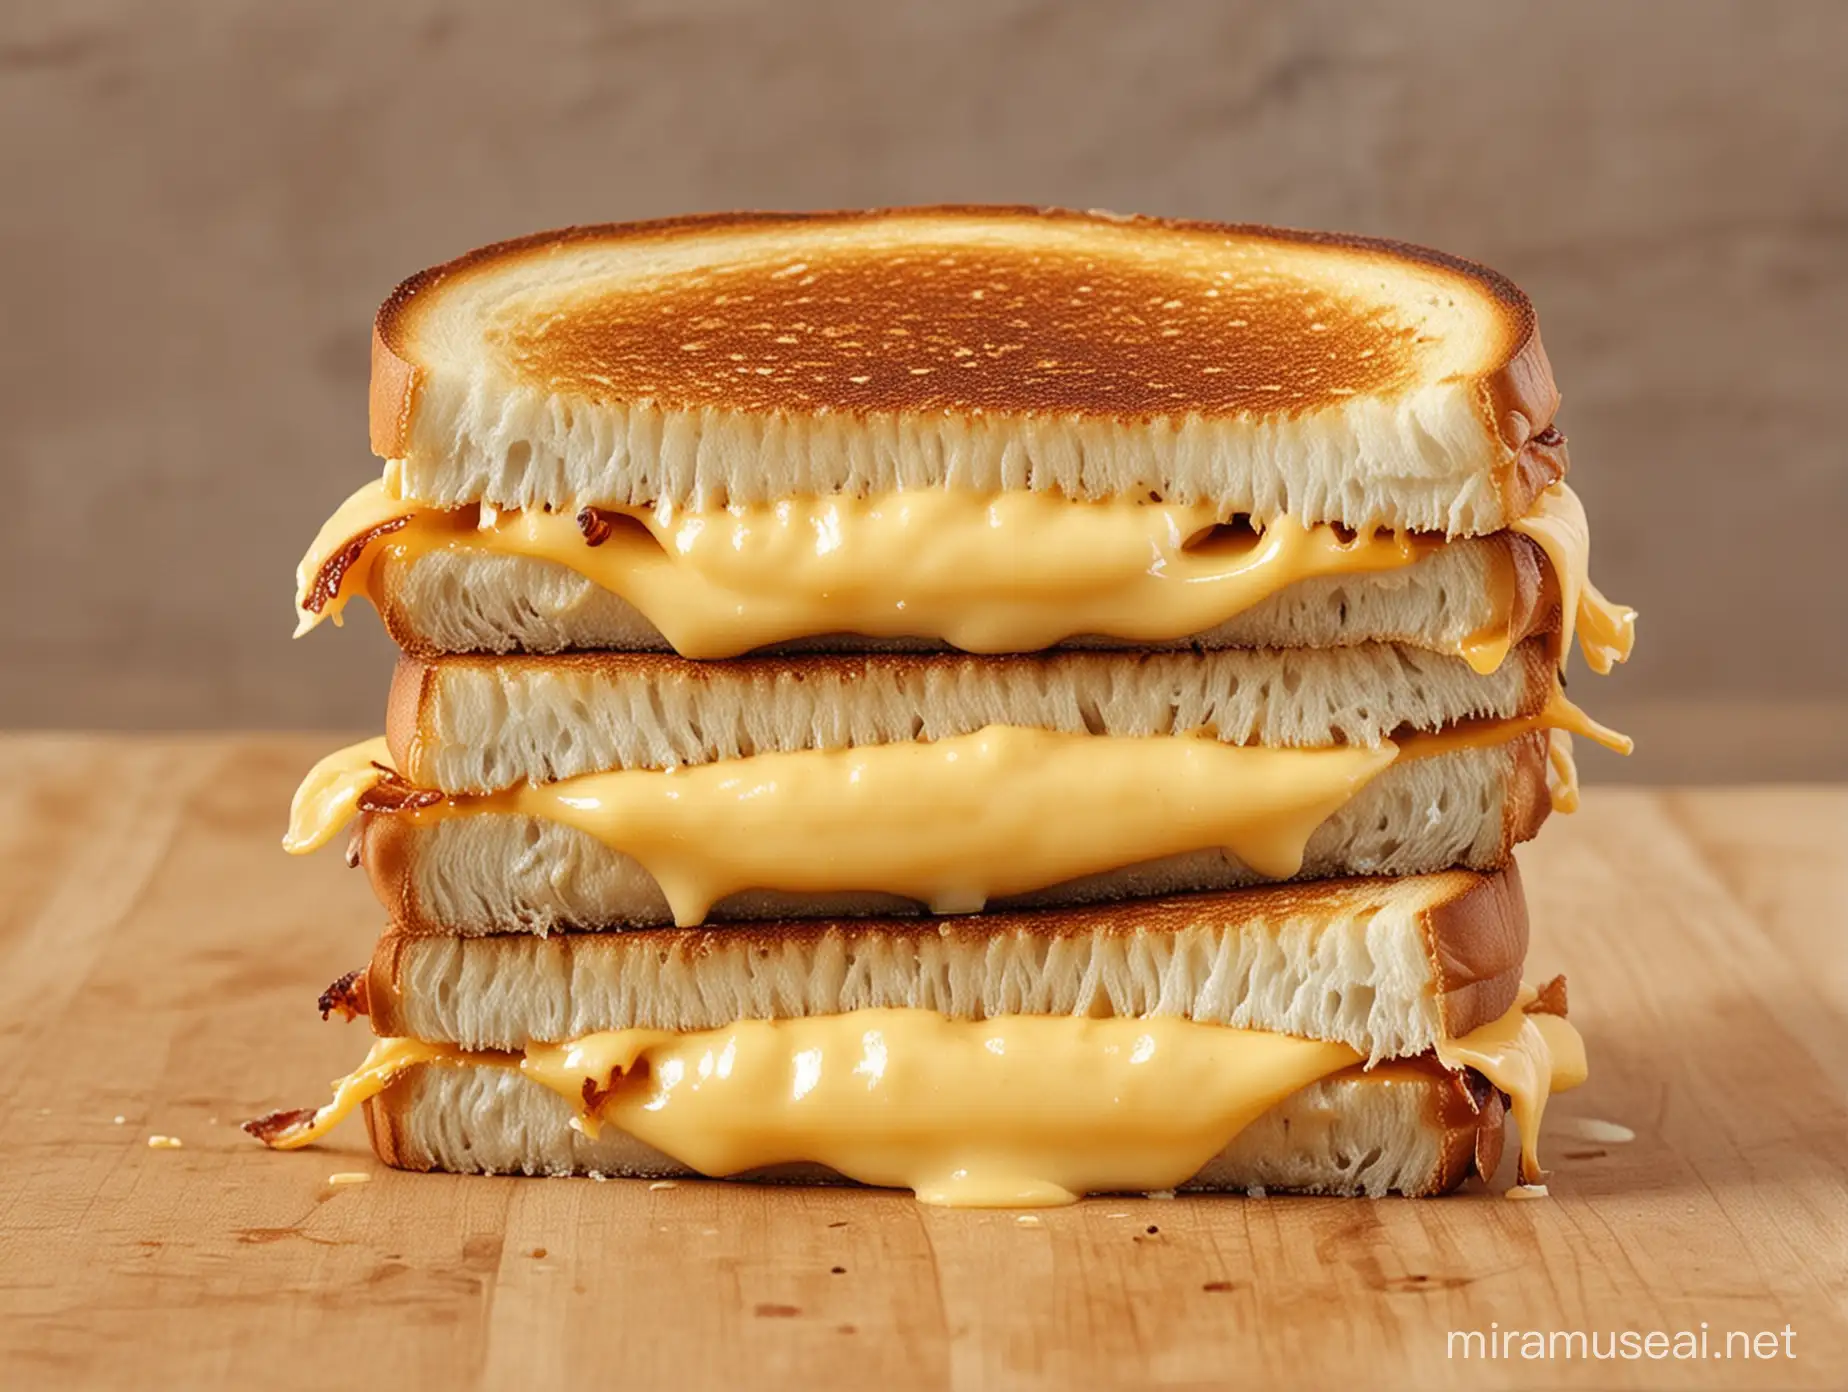 Grilled Cheese Day is a celebration that brings warmth and nostalgia to many. It's a day when the humble sandwich of melted cheese and toasted bread is elevated to star status